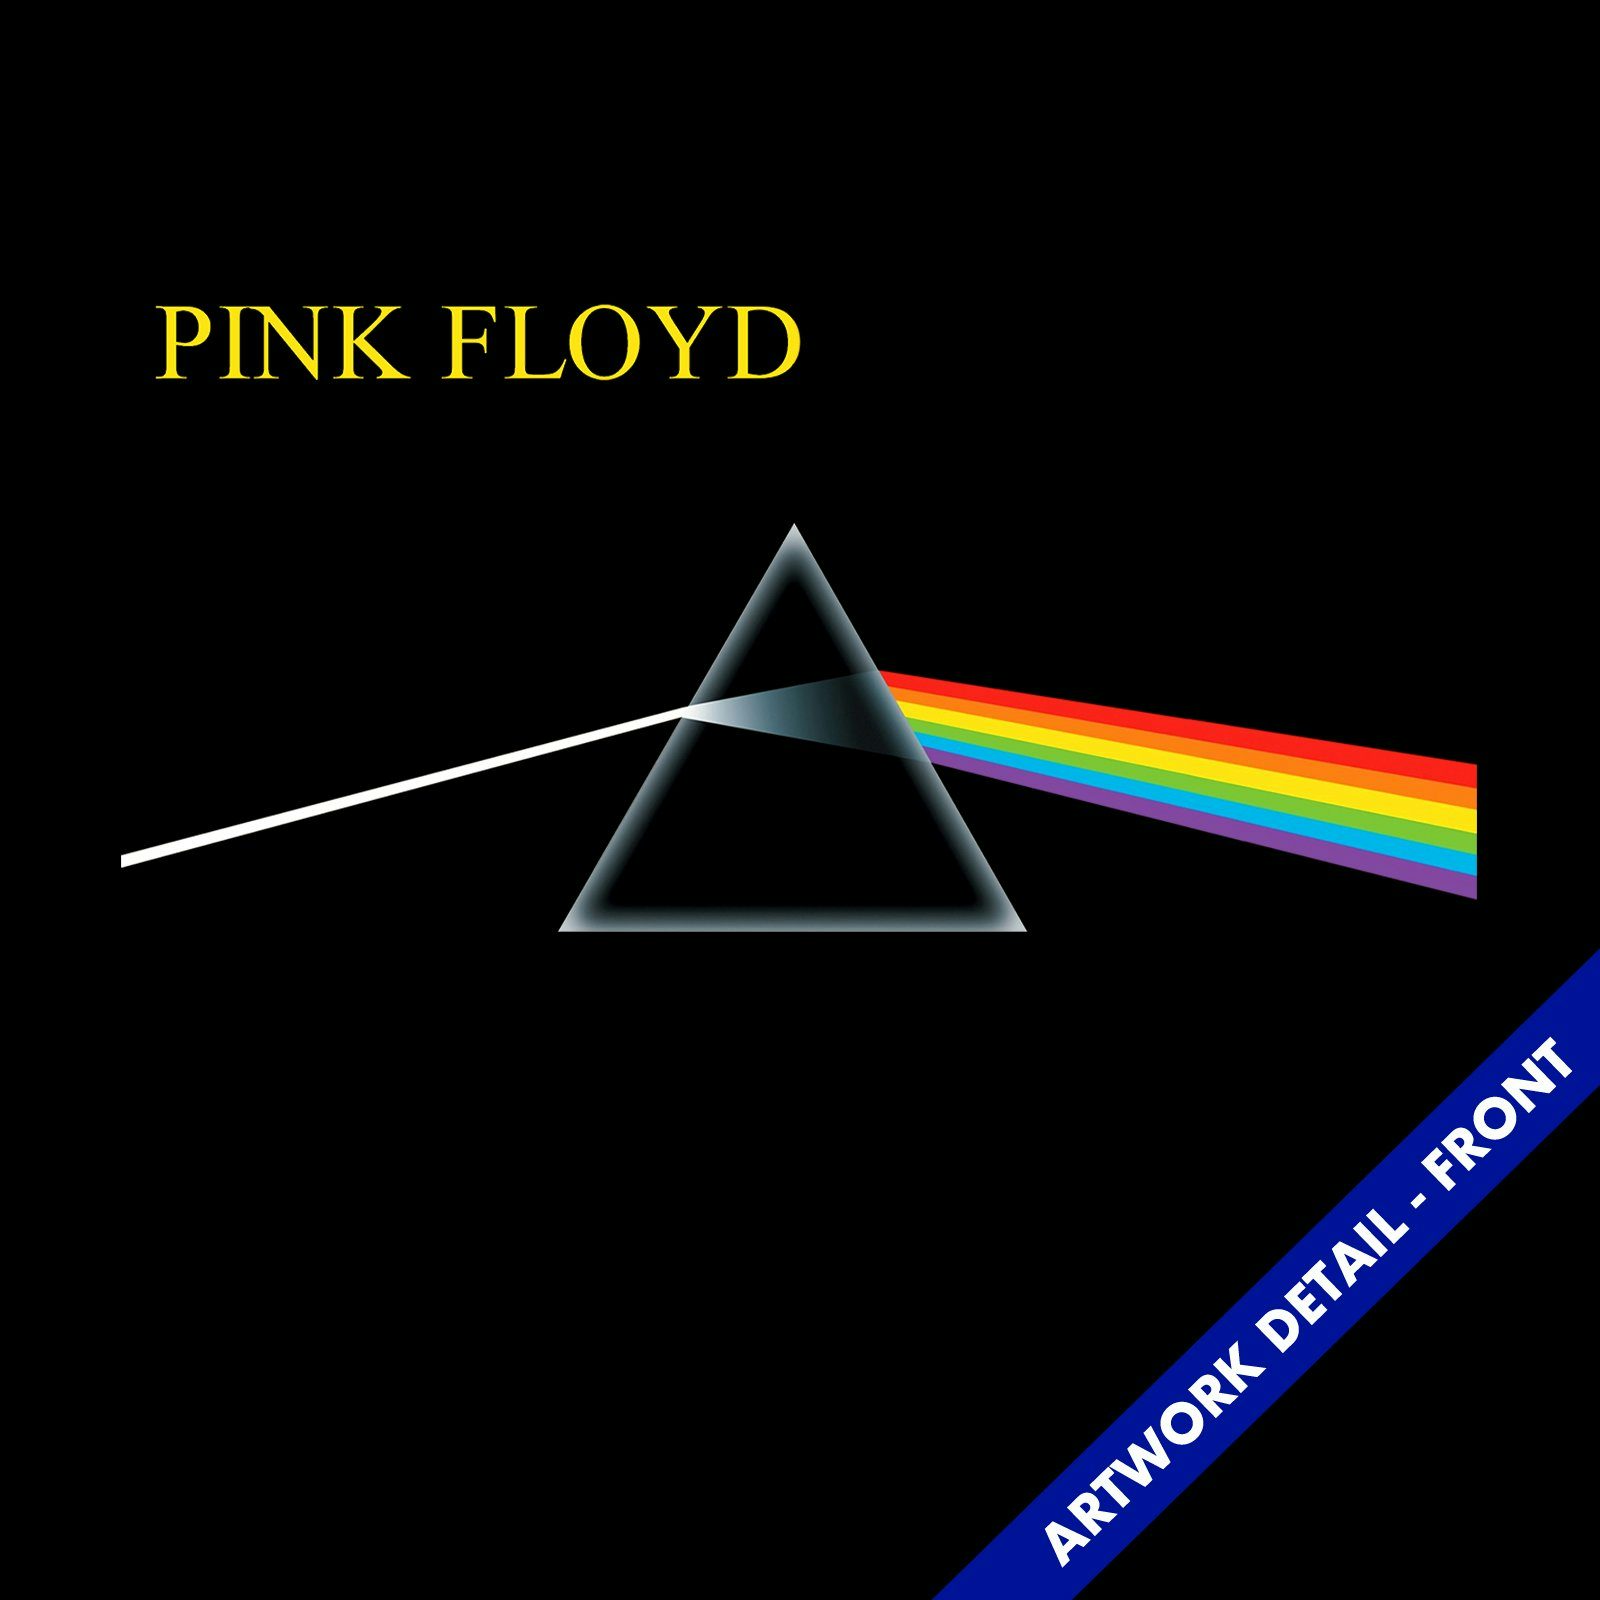 Authentic Pink Floyd Dark side of the Moon Prism Album Cover Distressed T-shirt